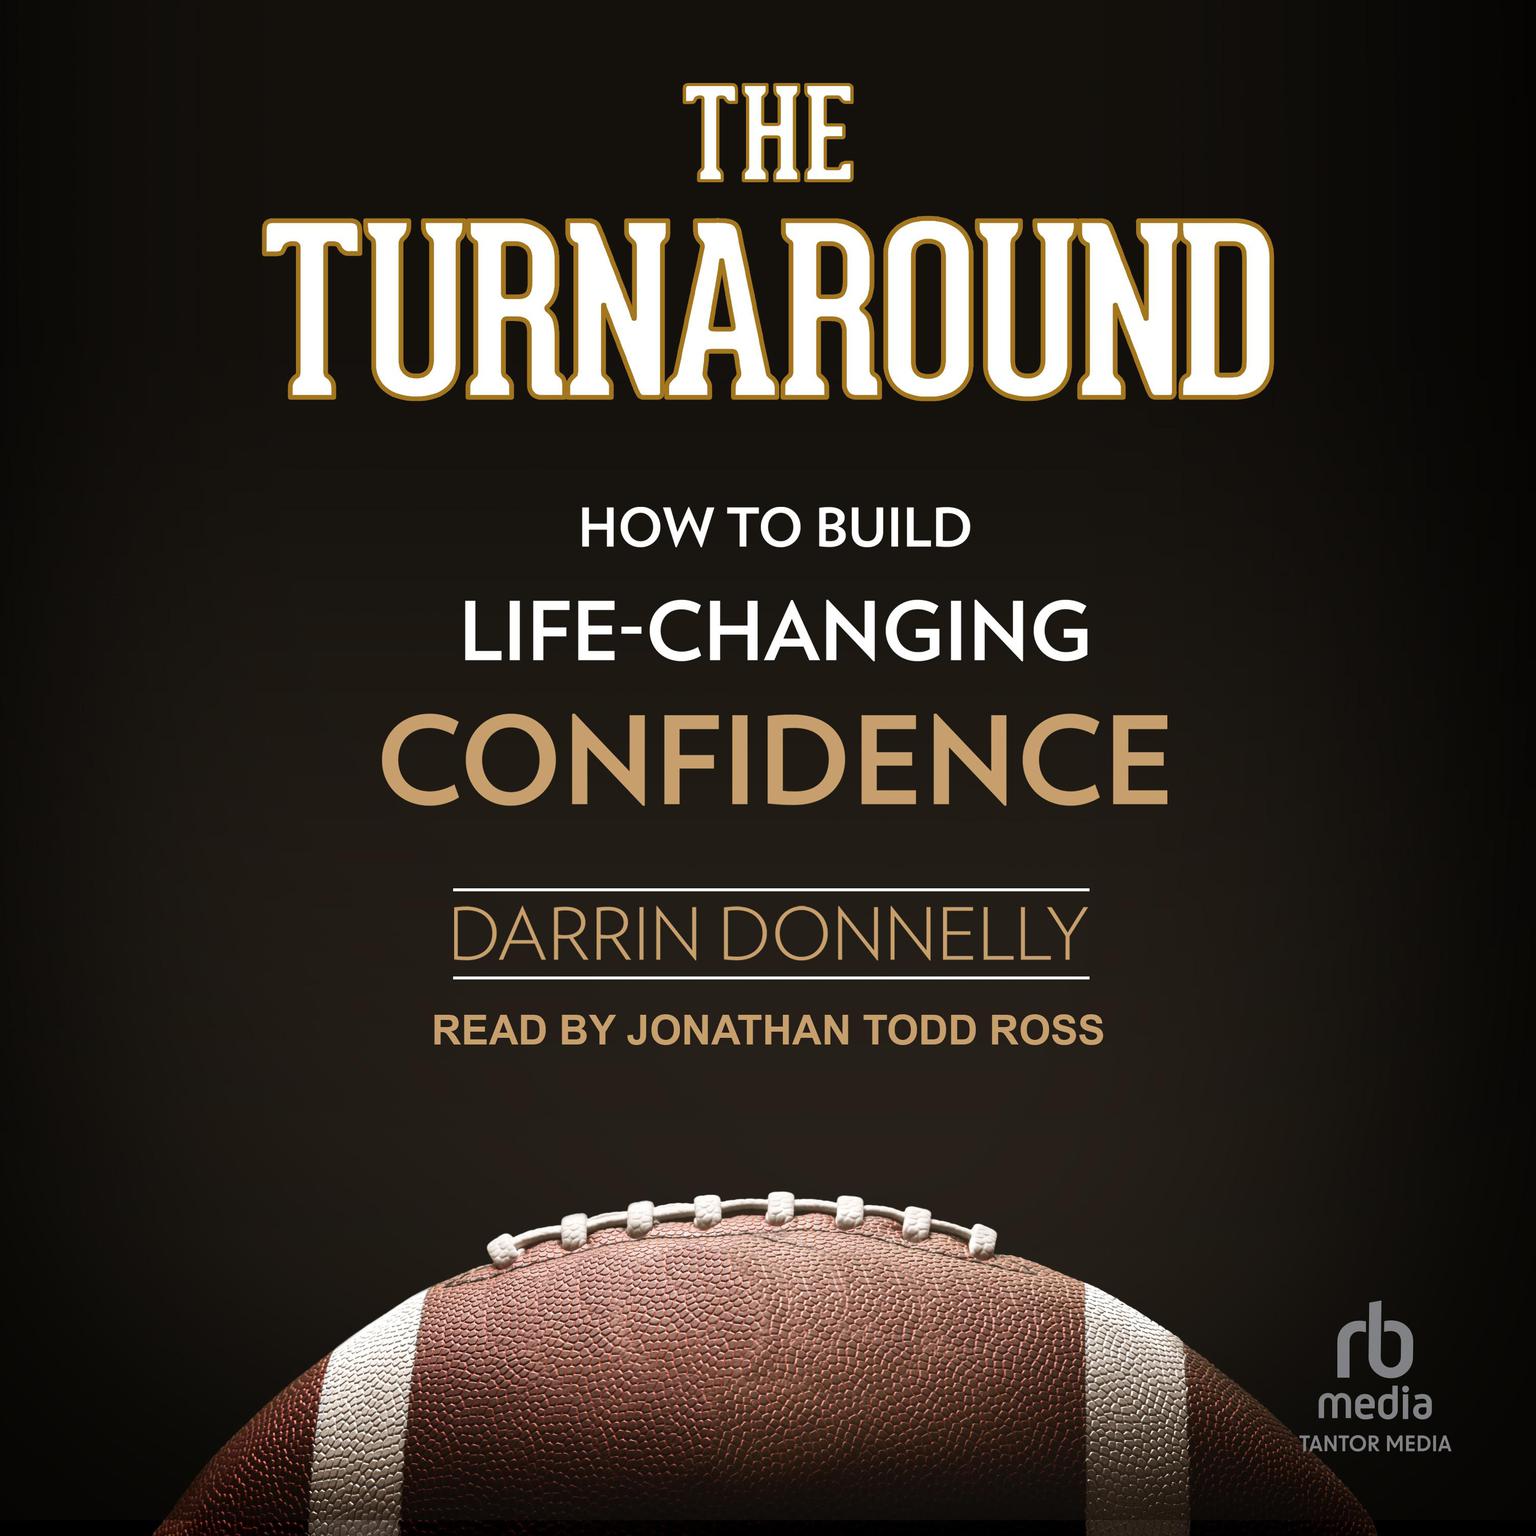 The Turnaround: How to Build Life-Changing Confidence Audiobook, by Darrin Donnelly